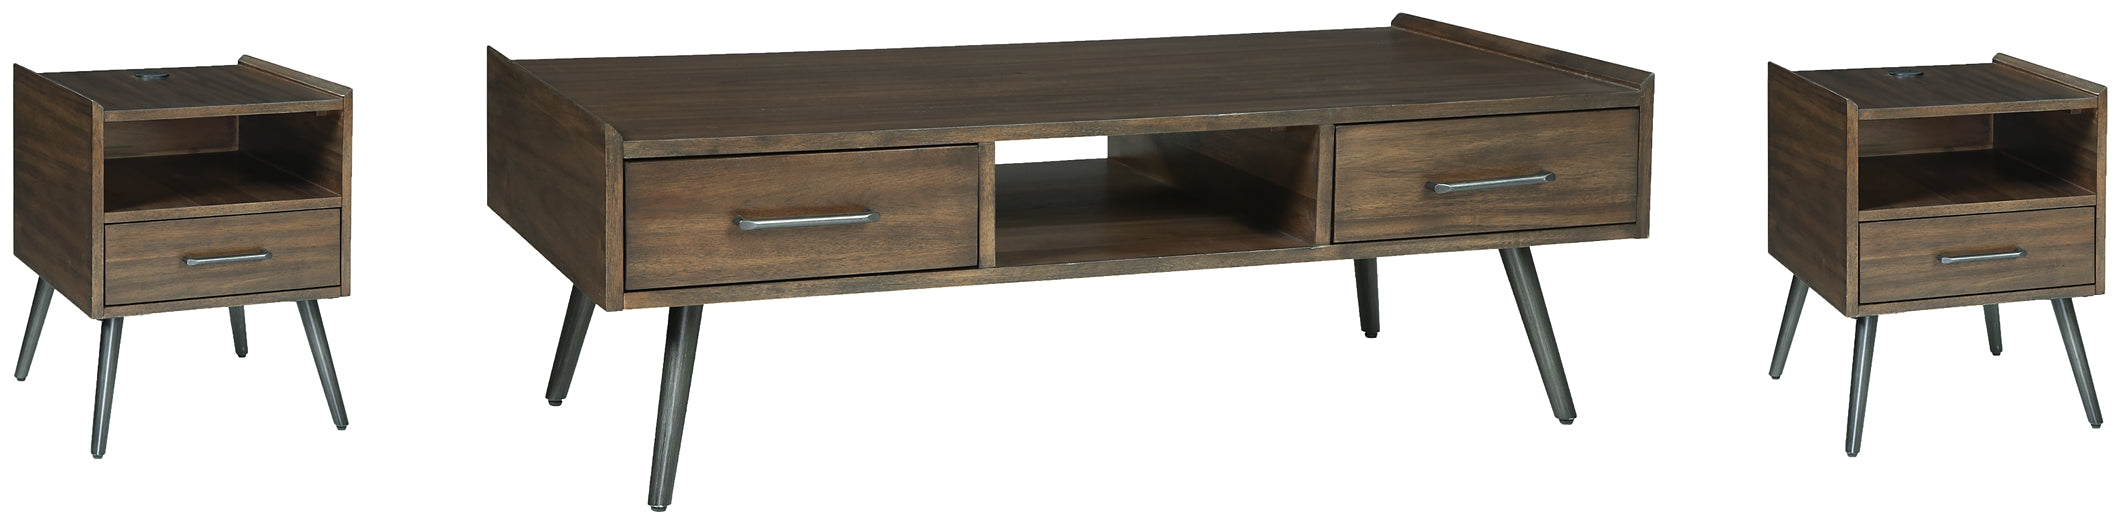 Calmoni Coffee Table with 2 End Tables